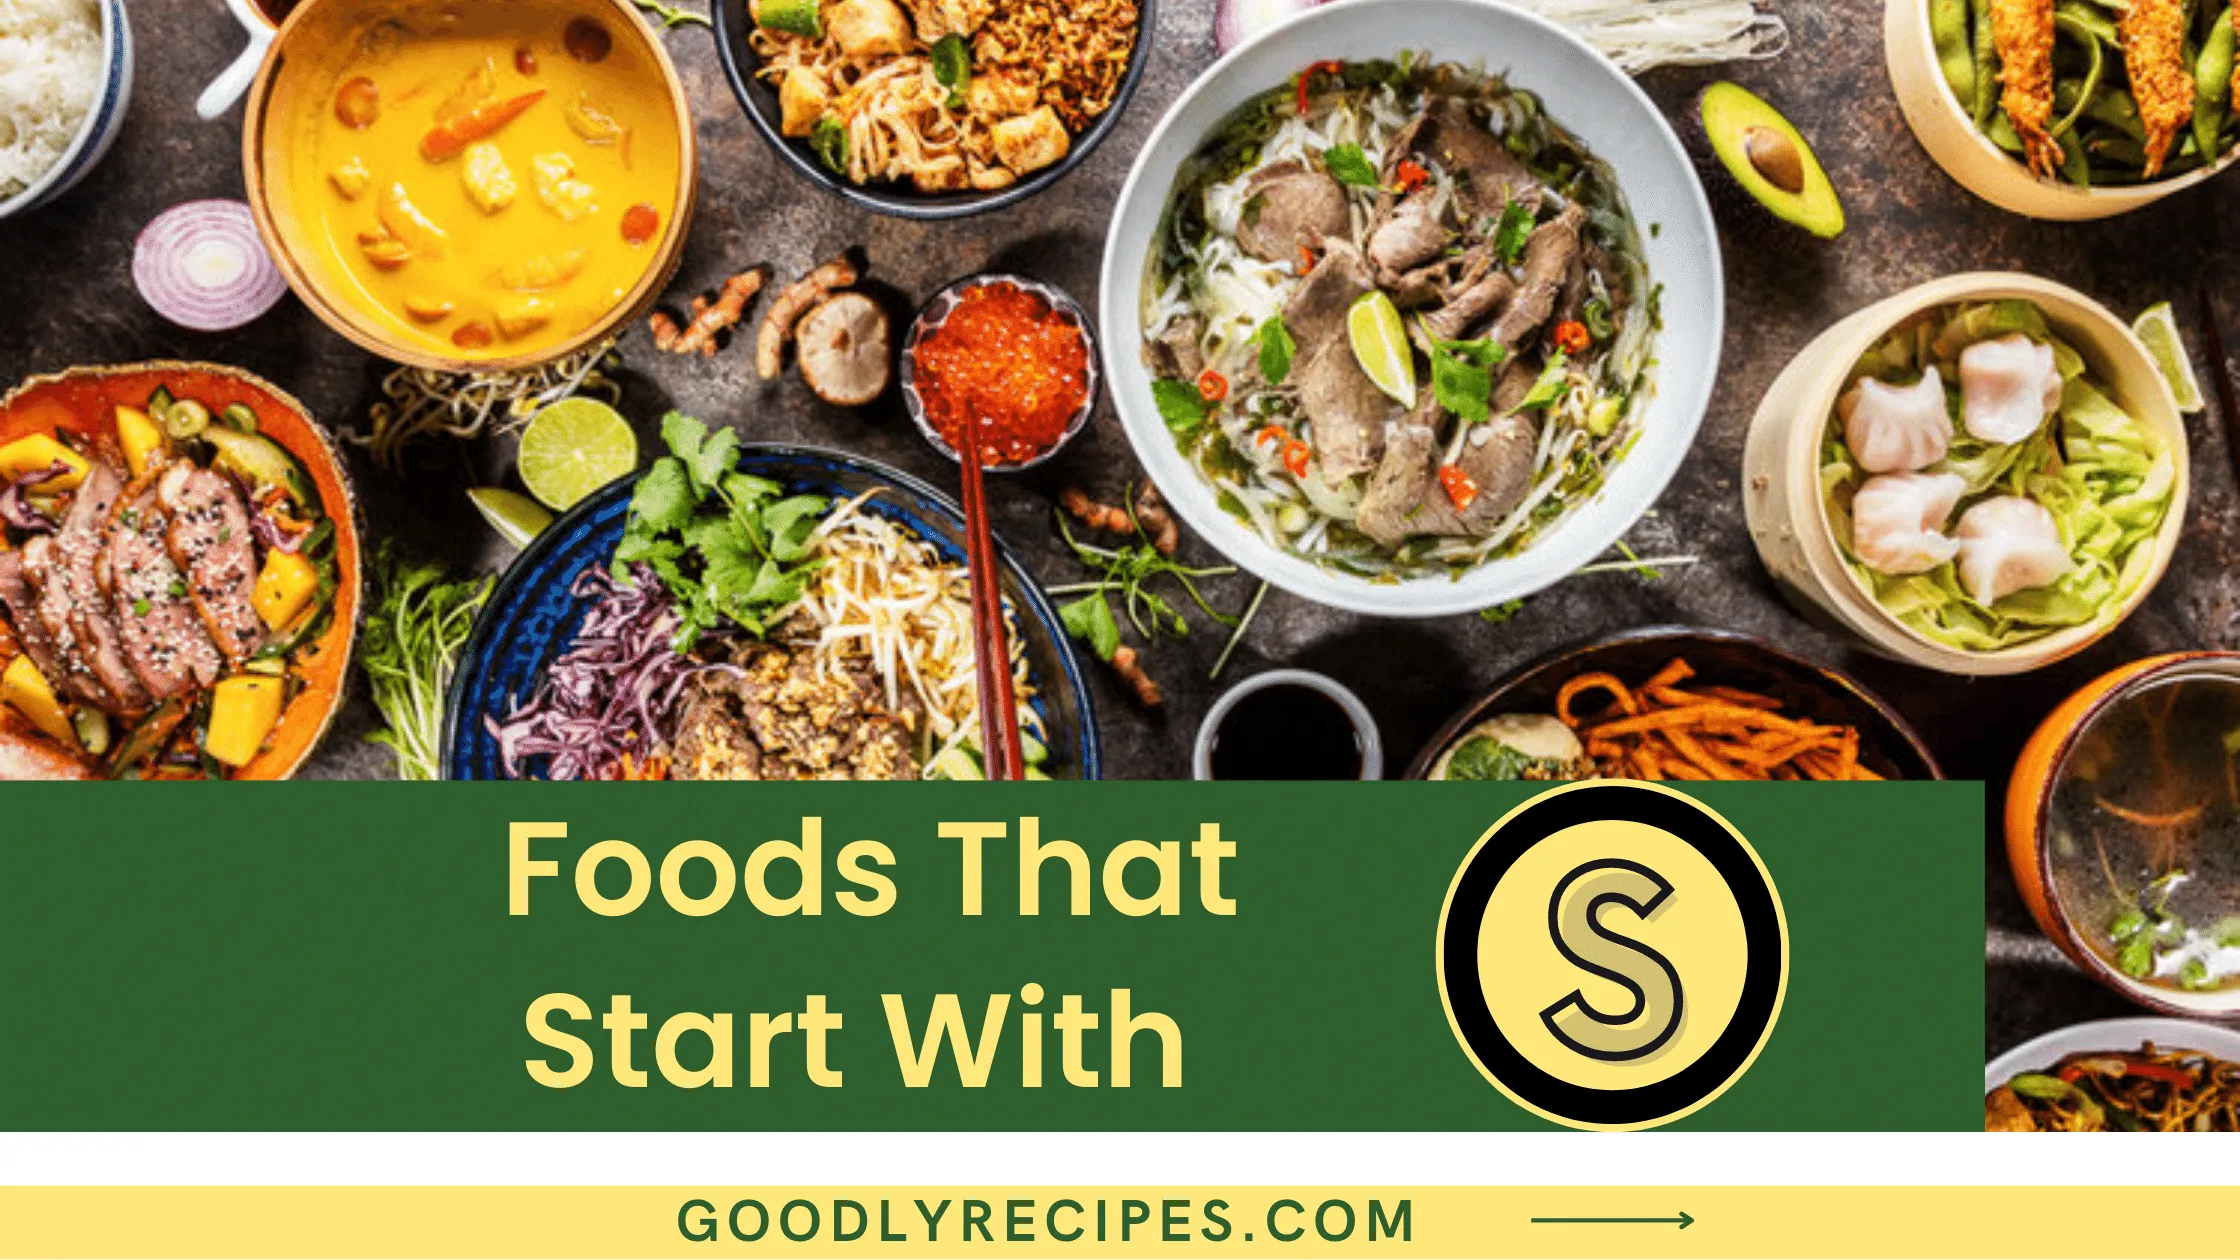 Foods That Start With S - Special Dishes